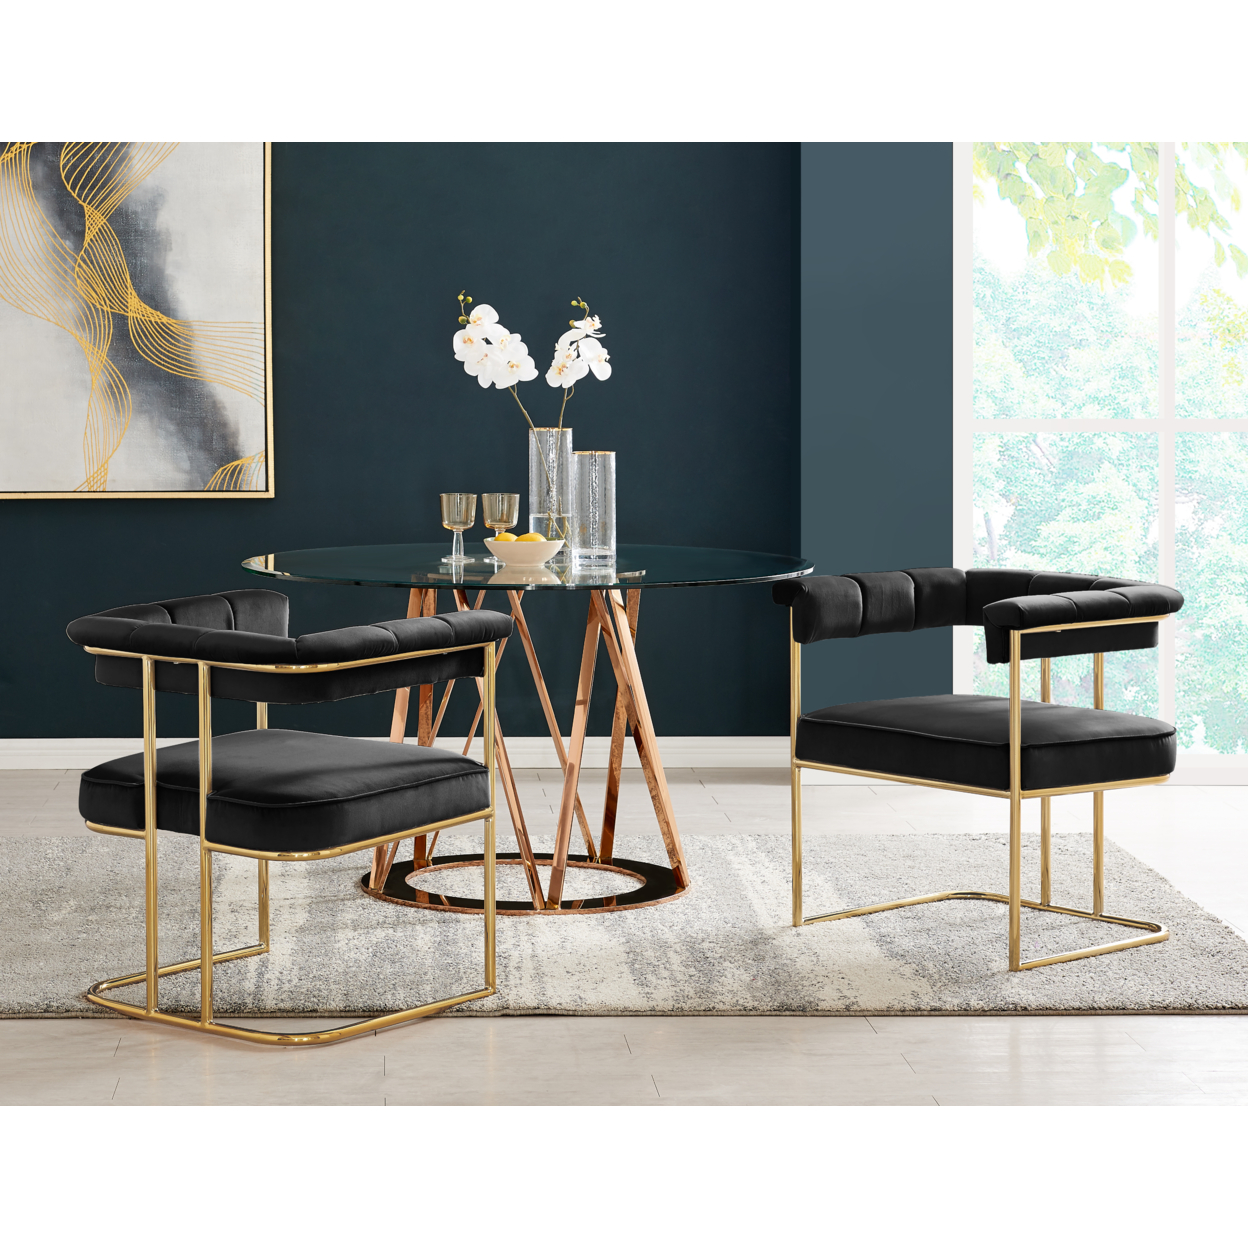 Iconic Home Pierce Dining Side Chair Velvet Upholstery Gold Plated (1 Piece) - Black